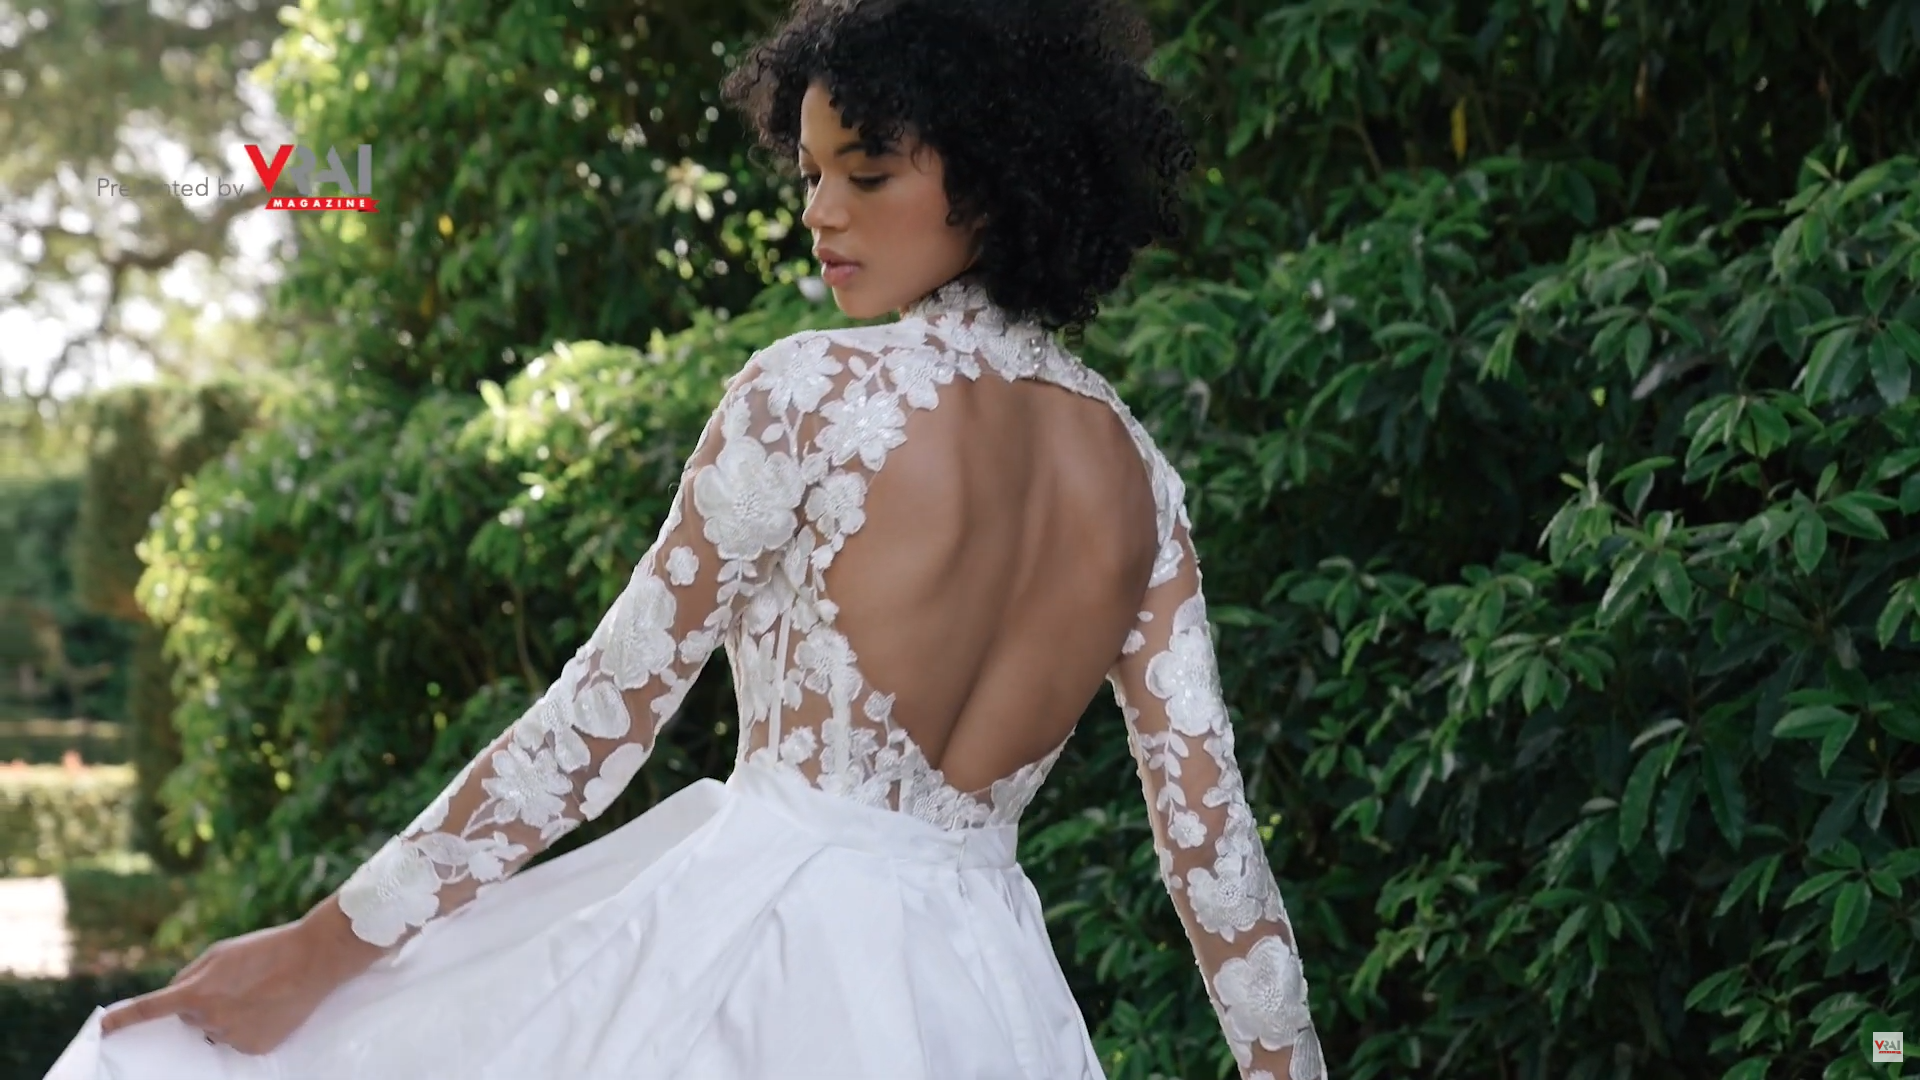 Lace Embroidery was present everywhere on this bridal dress of the Anne Barge Spring 2023 bridal collection